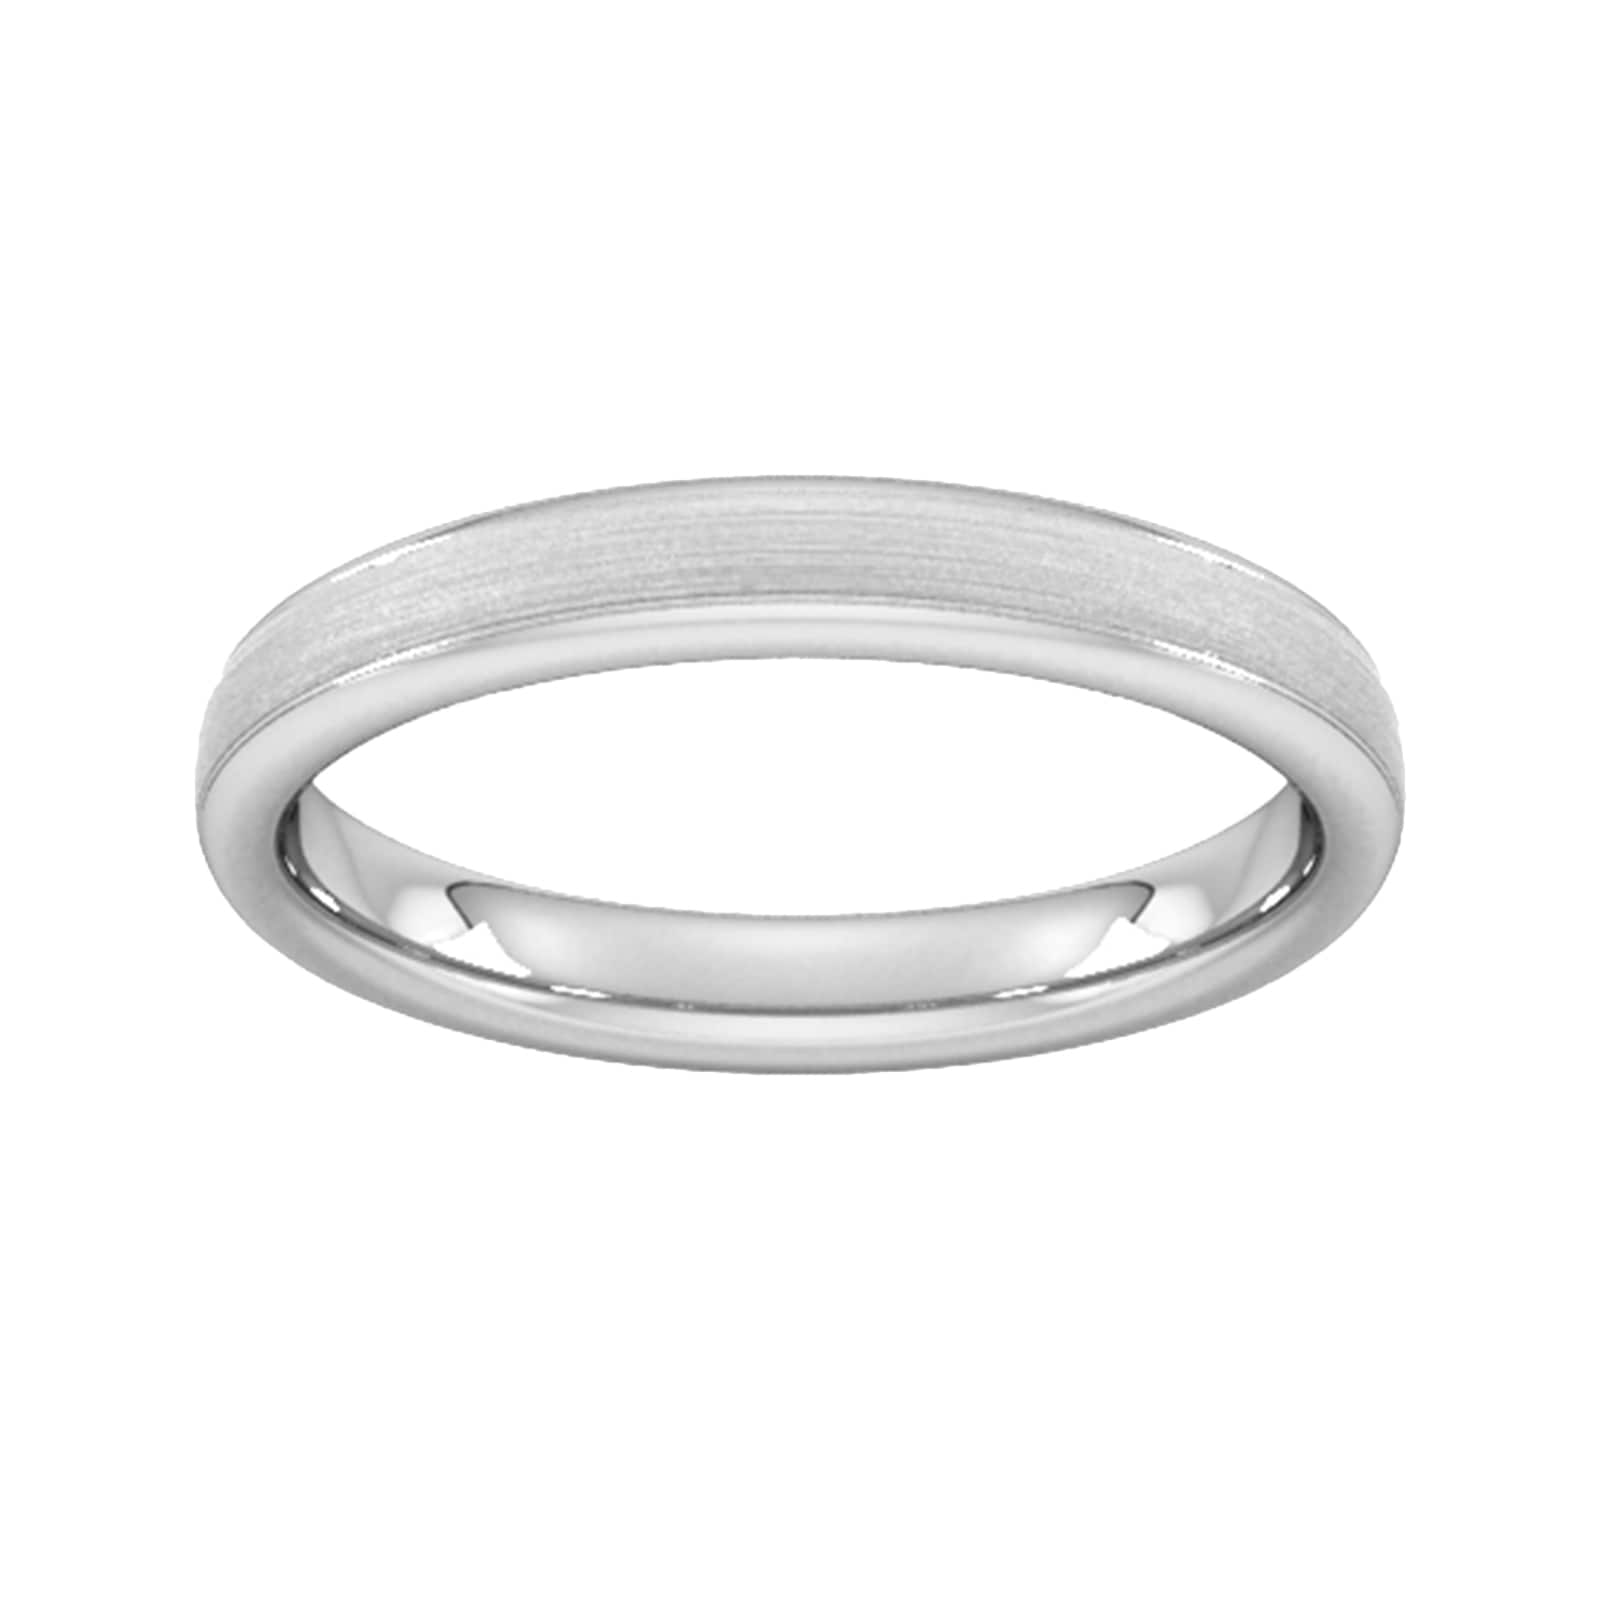 3mm Flat Court Heavy Matt Centre With Grooves Wedding Ring In 18 Carat White Gold - Ring Size O